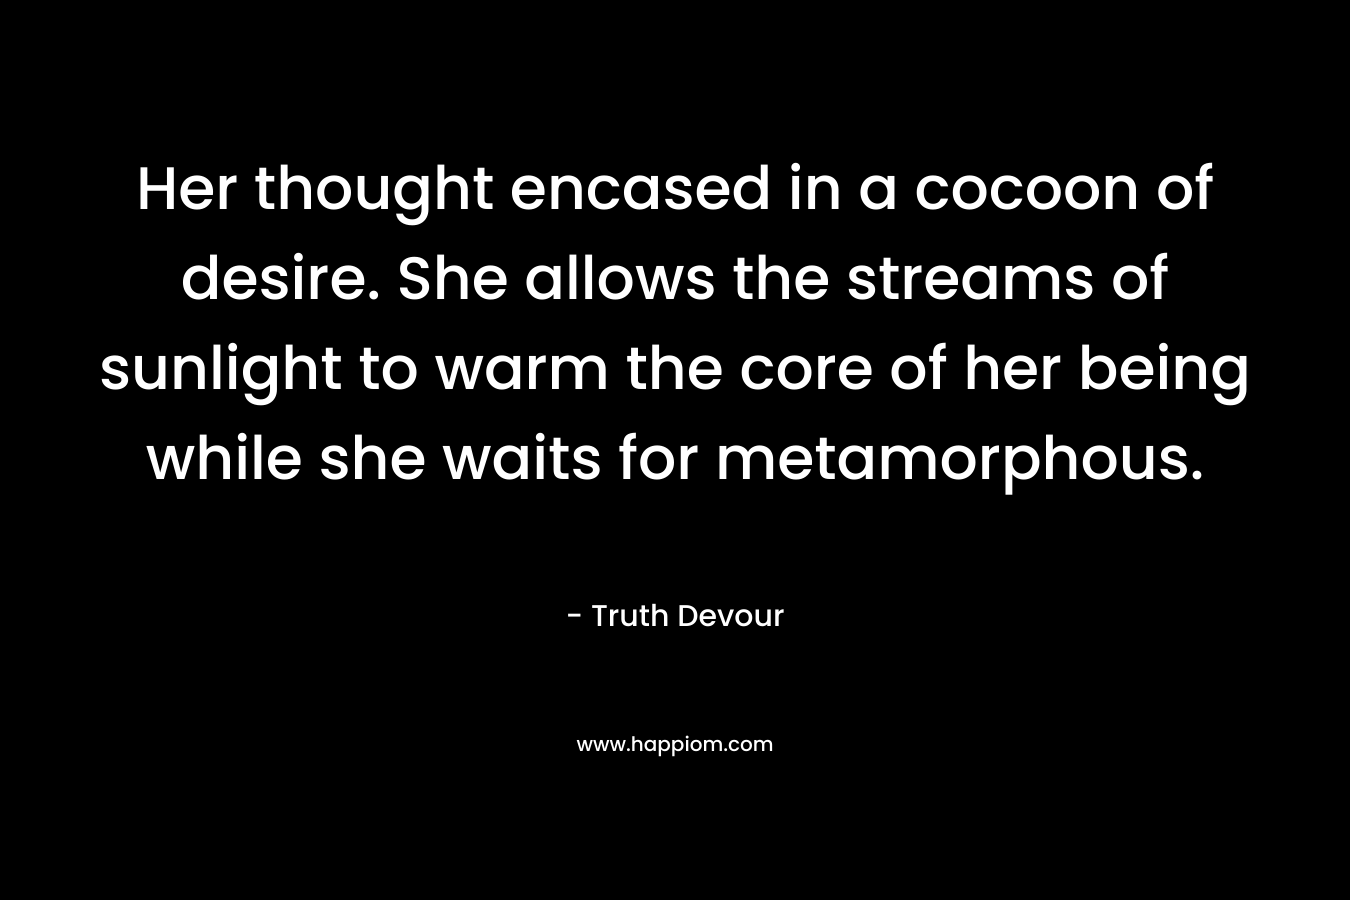 Her thought encased in a cocoon of desire. She allows the streams of sunlight to warm the core of her being while she waits for metamorphous. – Truth Devour